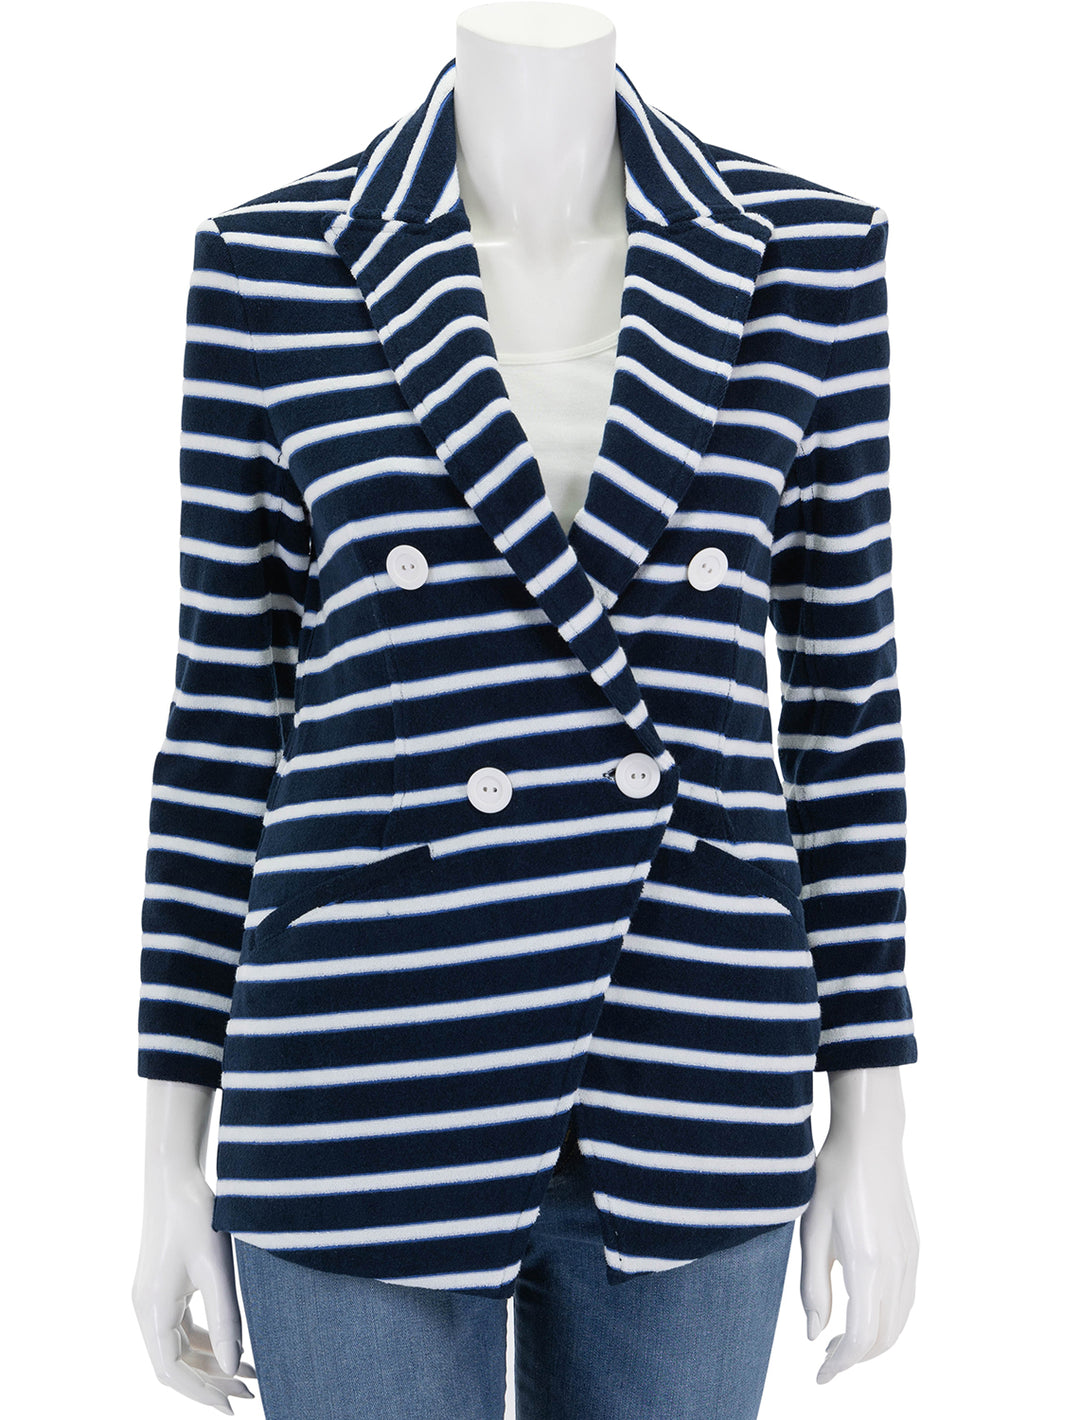 Front view of Veronica Beard's ortiz jacket in marine stripe terry, buttoned.